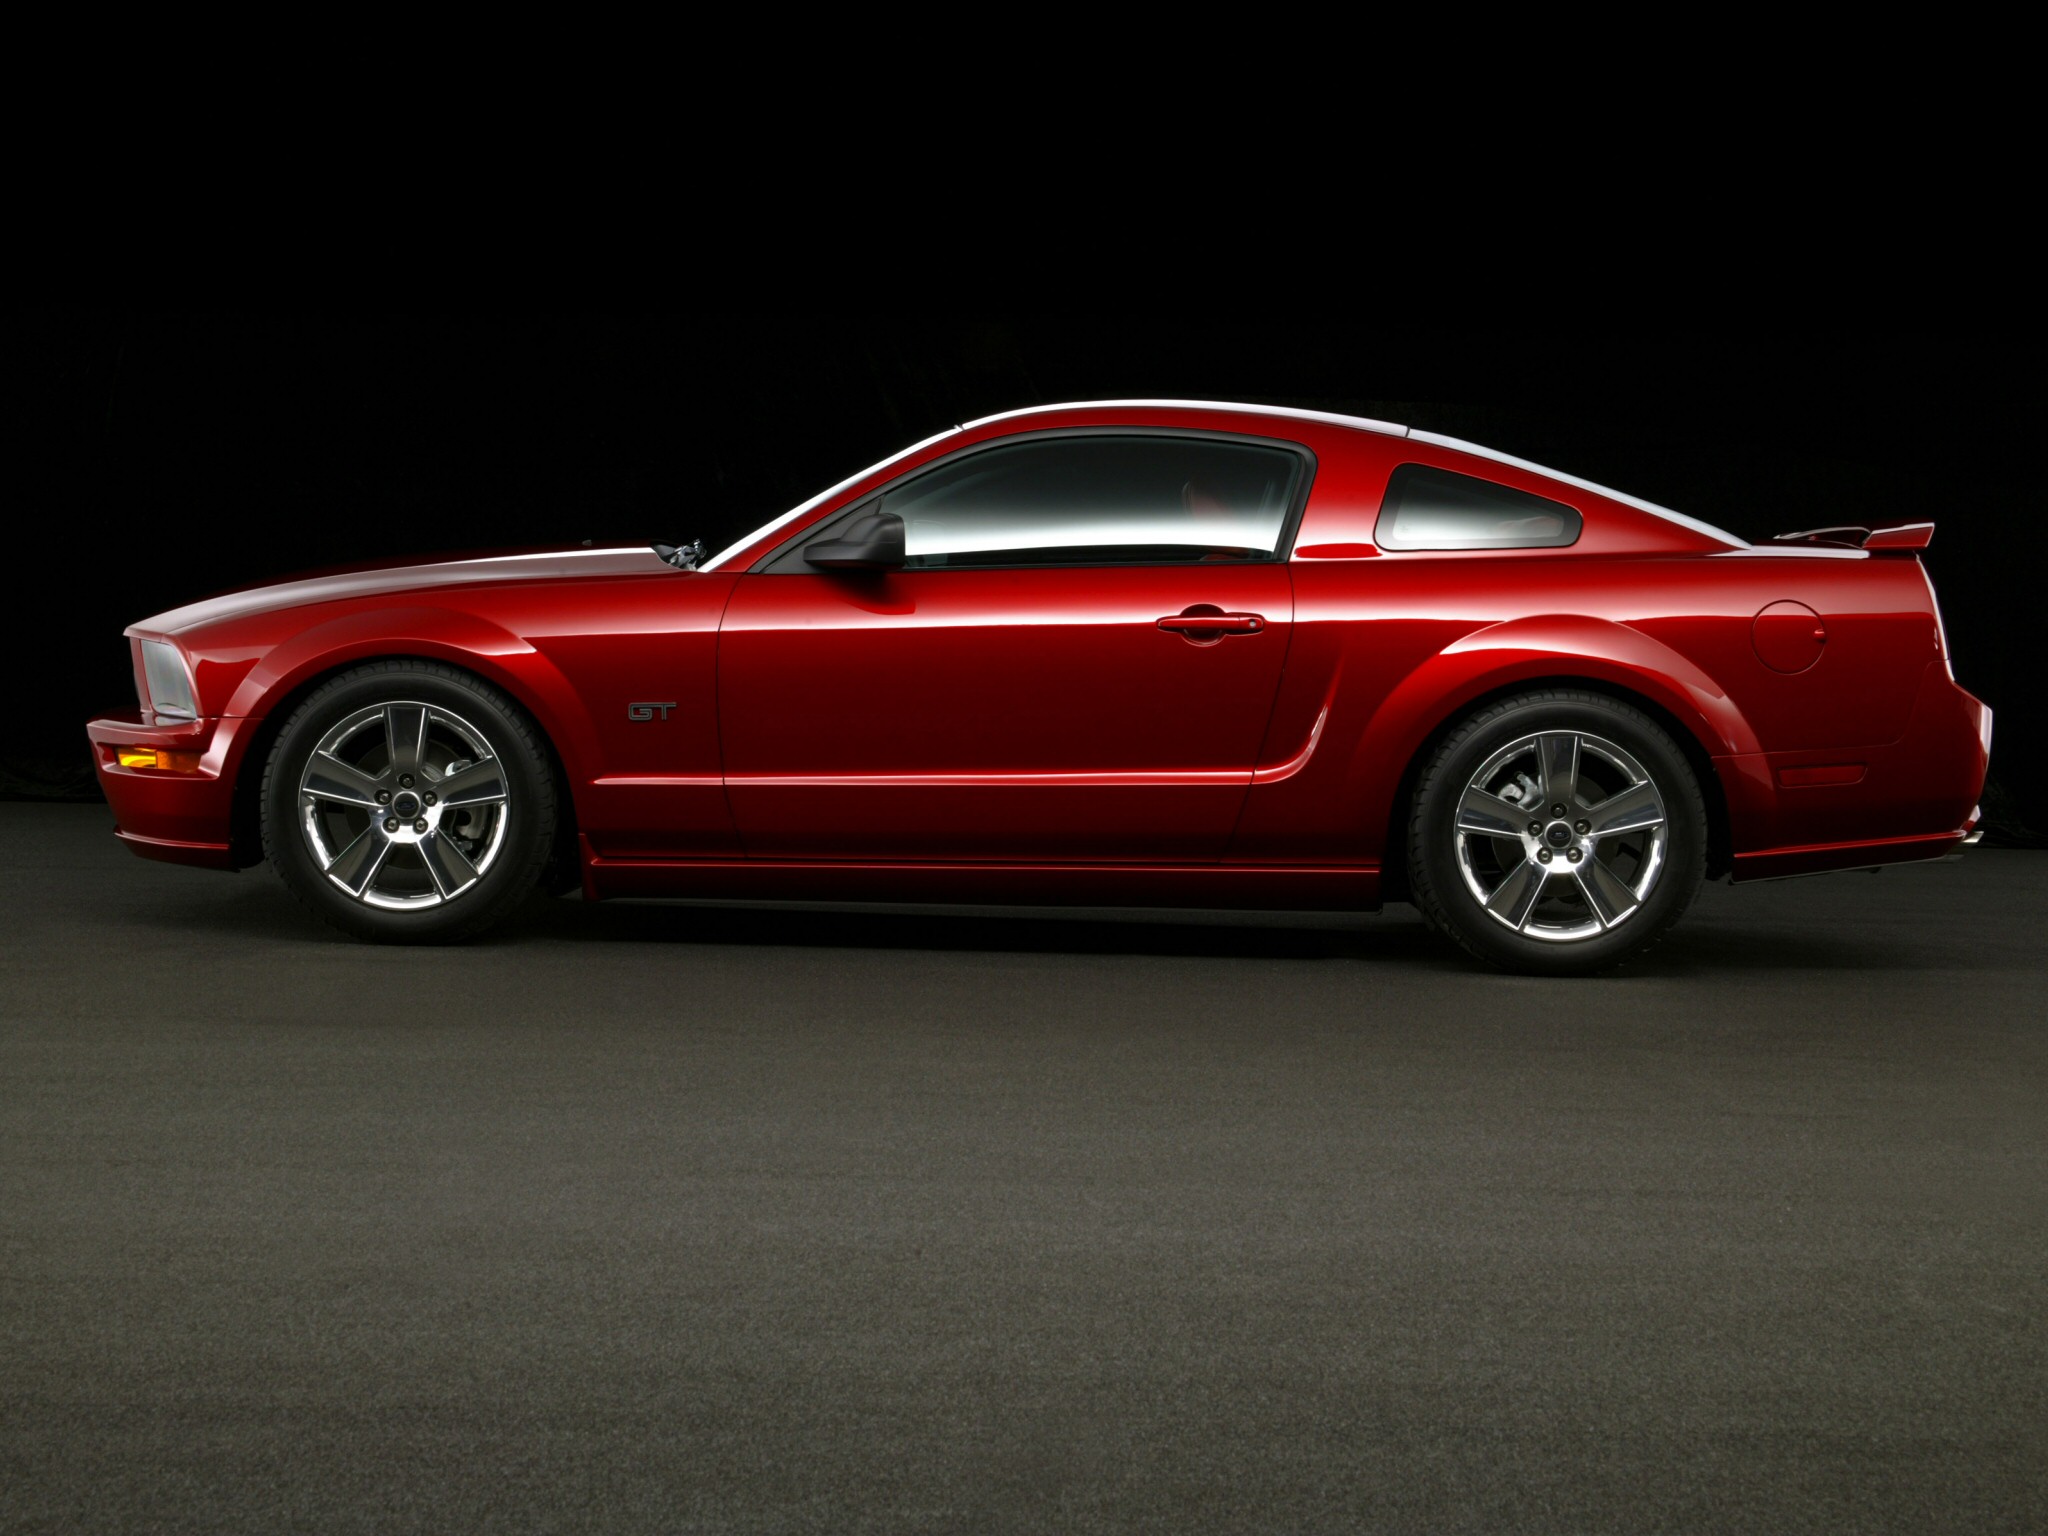  2005  Ford  Mustang  Muscle G t Wallpapers HD Desktop 